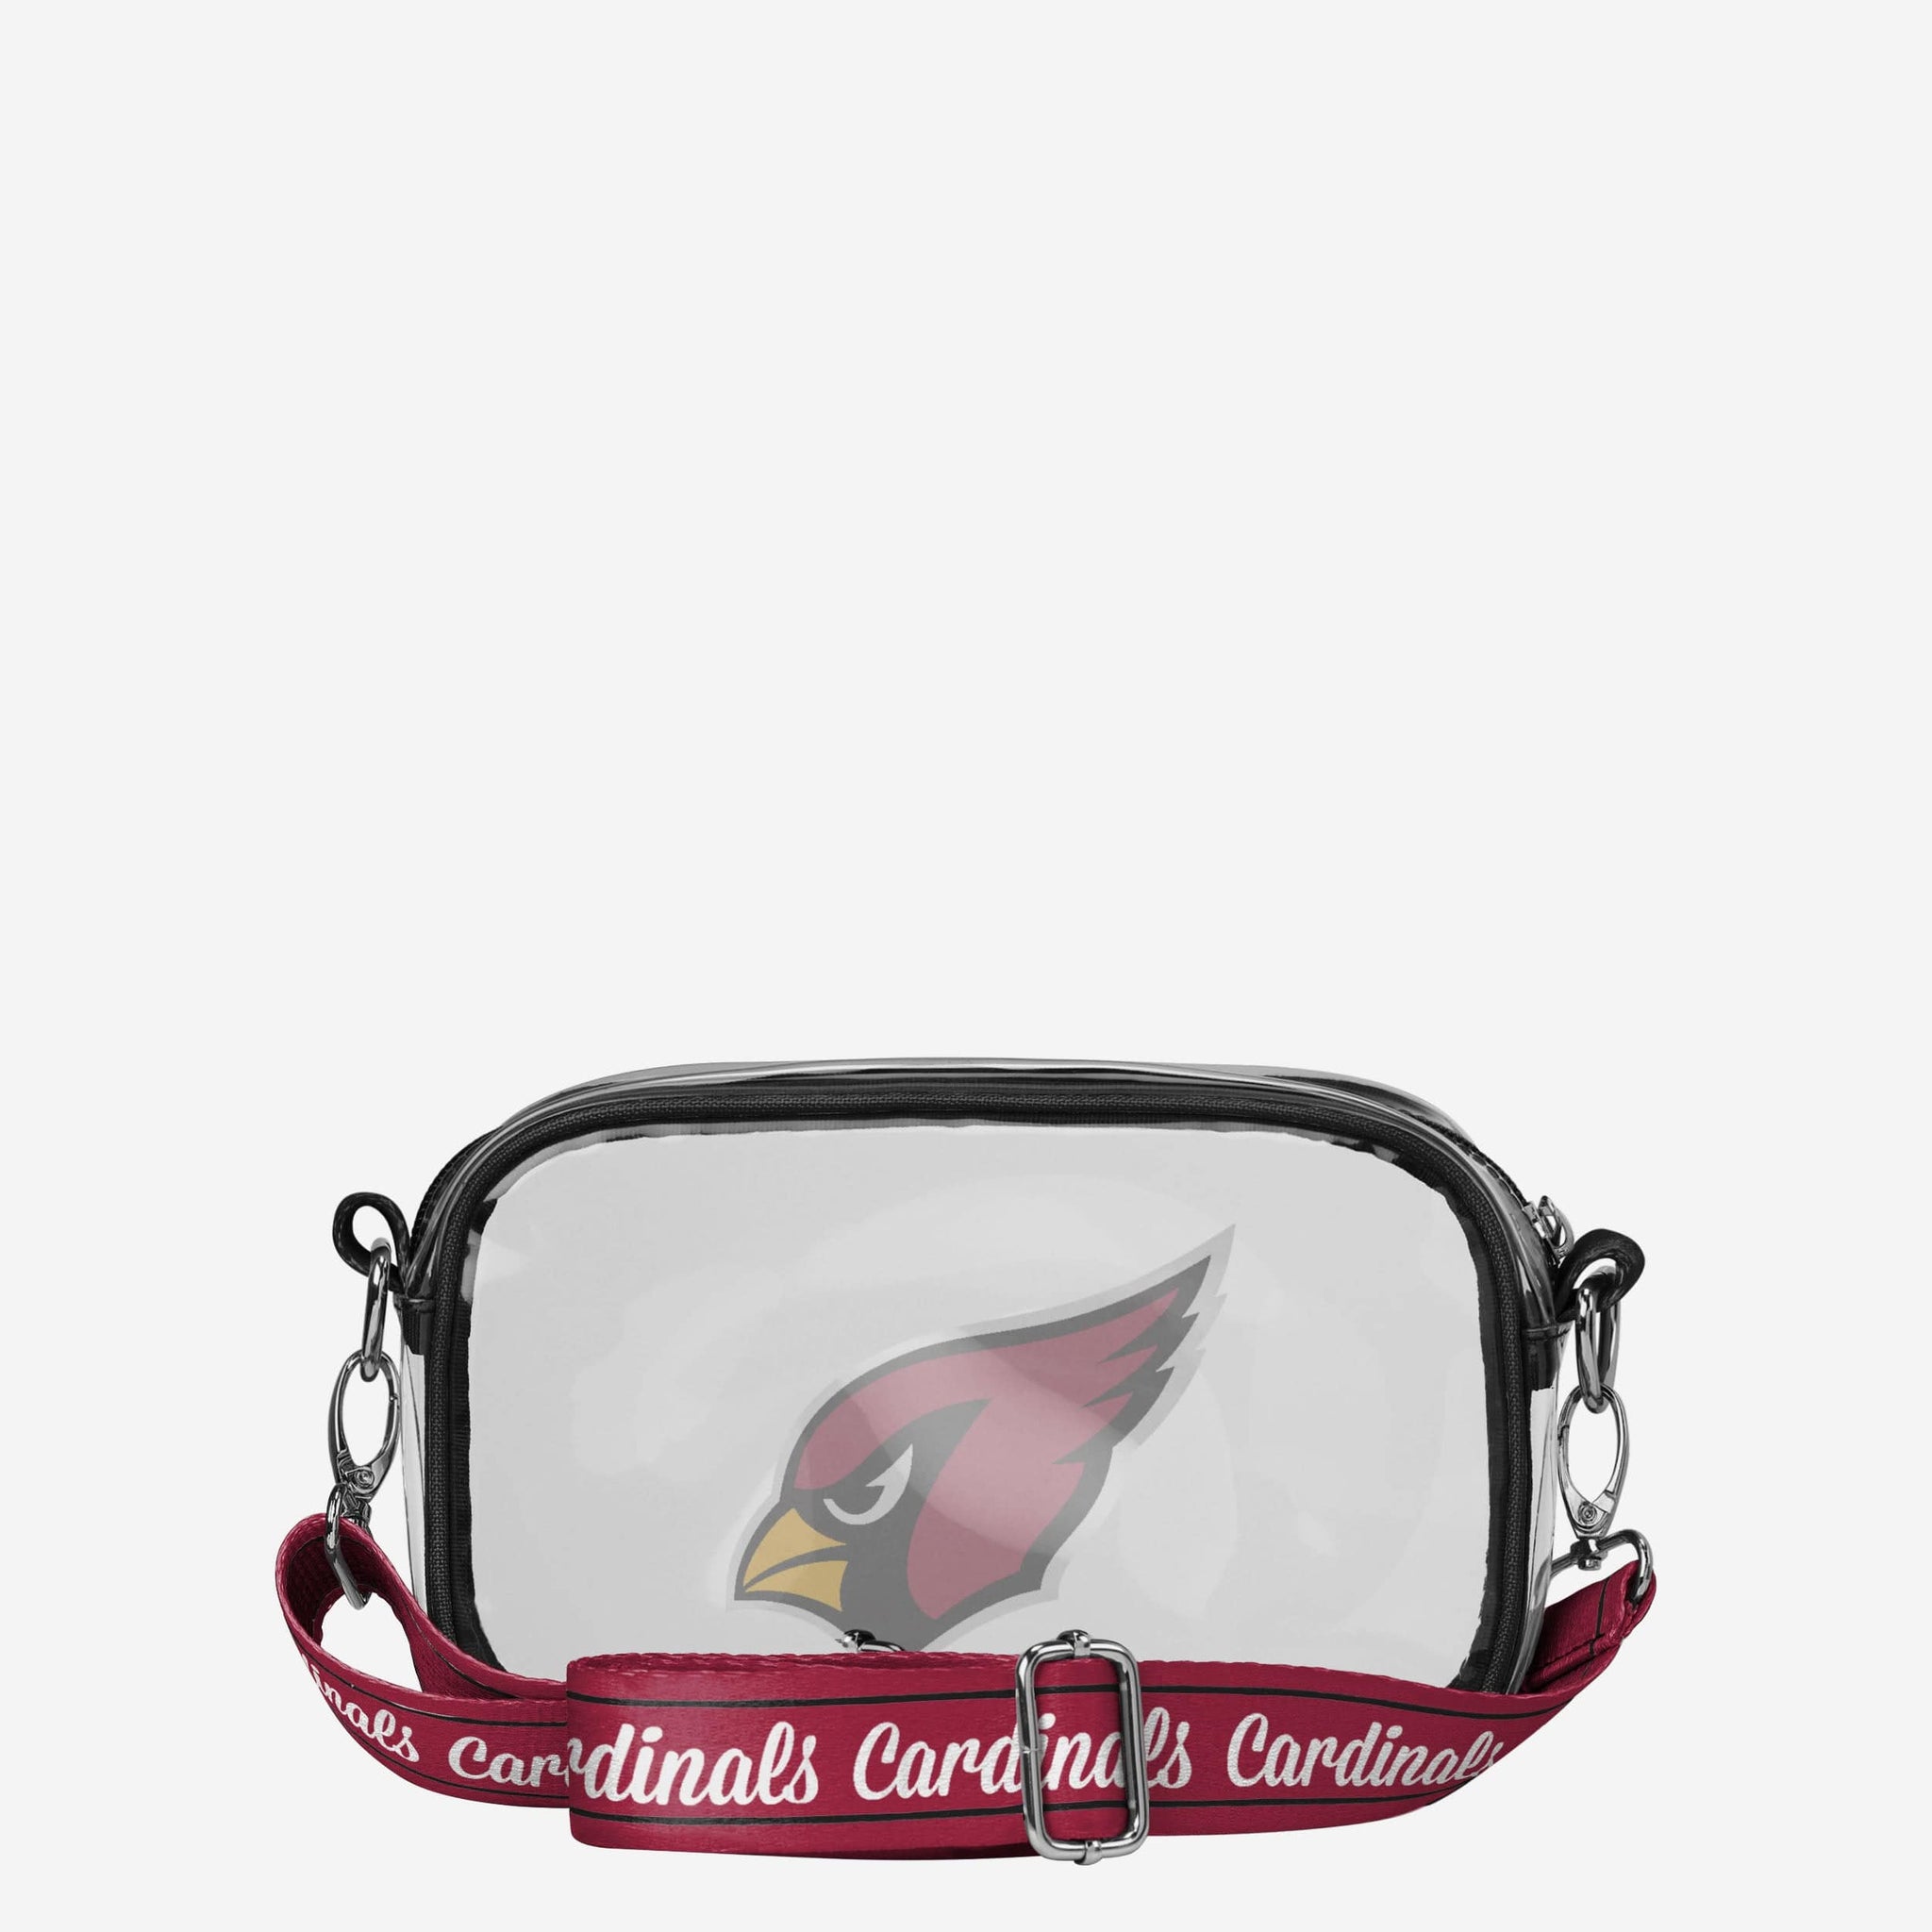 st louis cardinals luggage tag